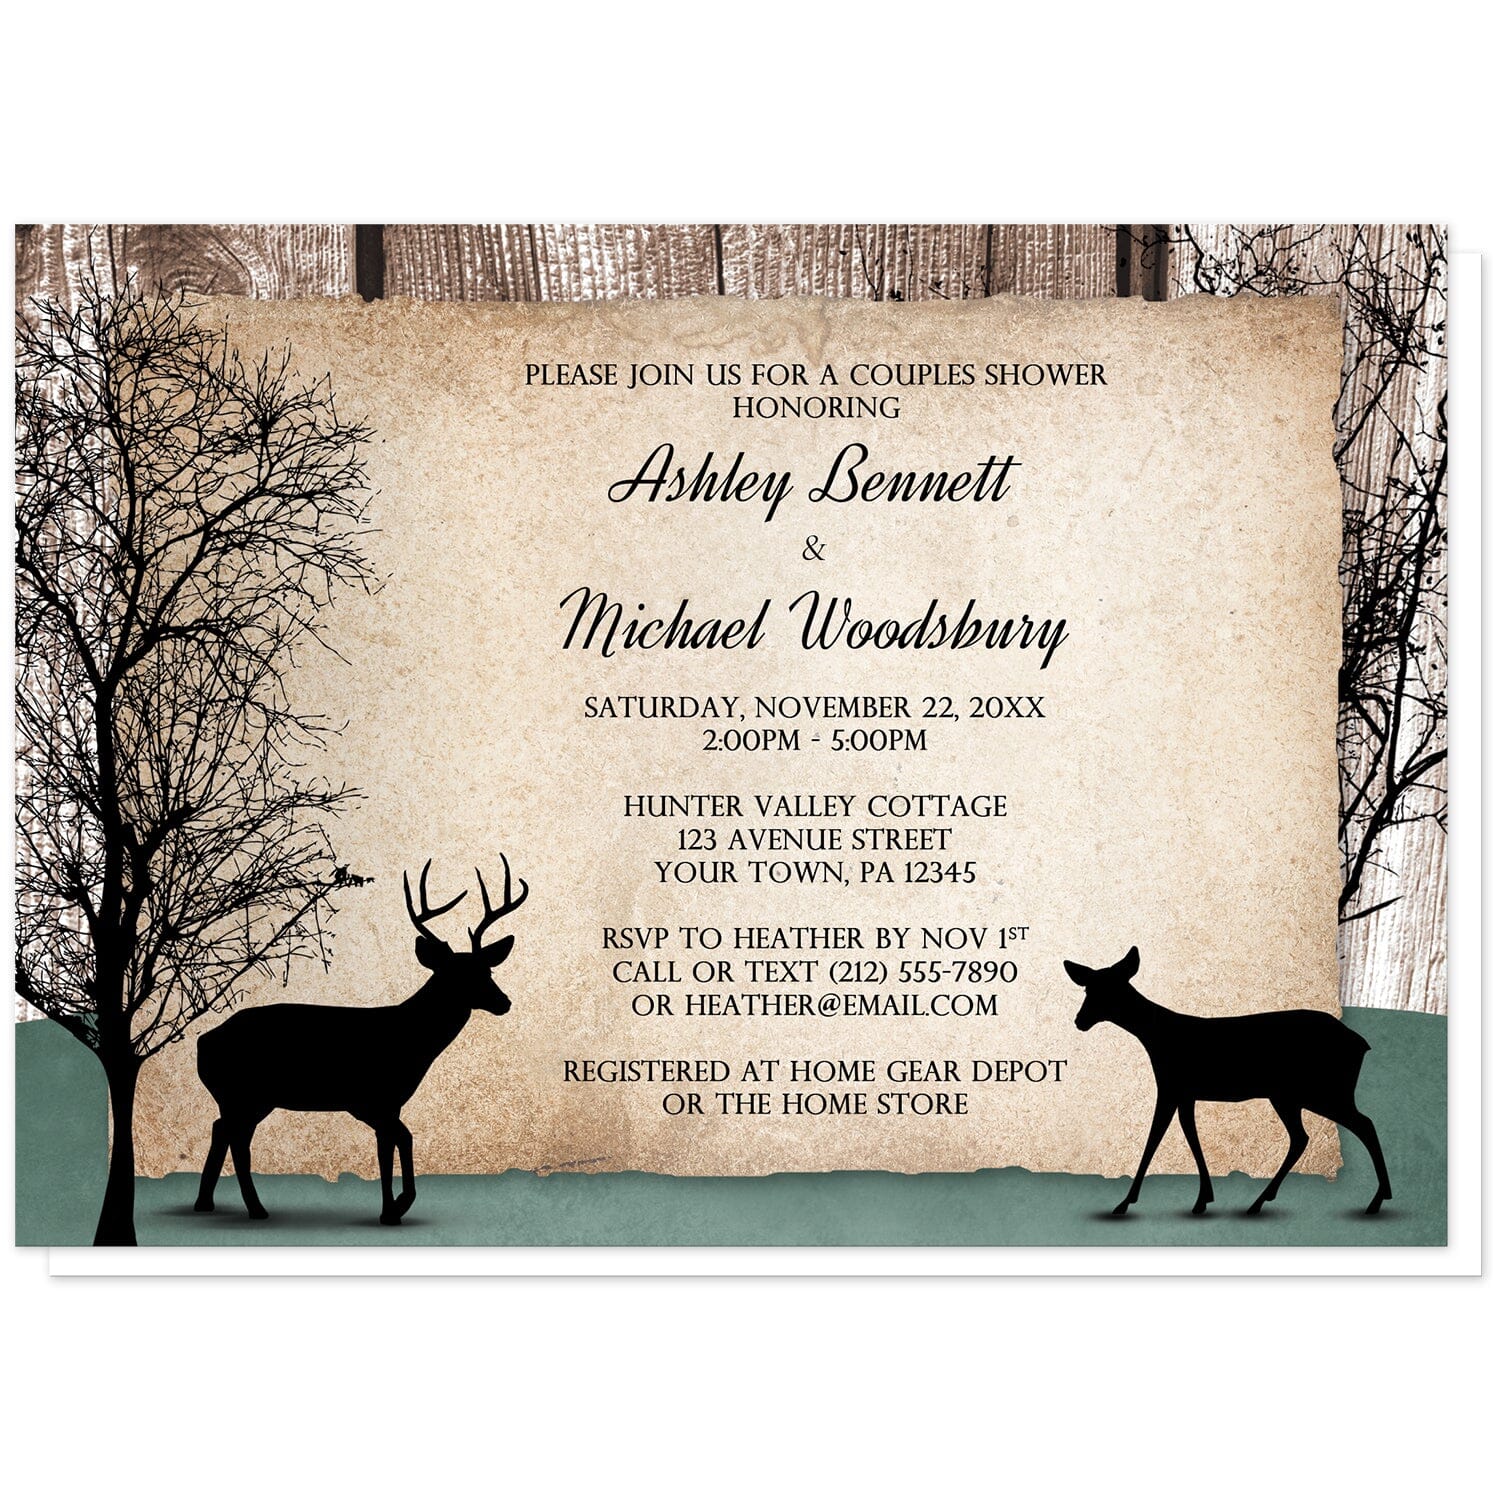 Rustic Woodsy Deer Couples Shower Invitations at Artistically Invited. Rustic woodsy deer couples shower invitations designed with silhouettes of a buck deer with antlers, a doe, and winter trees over a wood brown background and a faded hunter green design along the bottom. Your personalized couples shower celebration details are custom printed in black over a tattered rustic paper illustration between the deer.